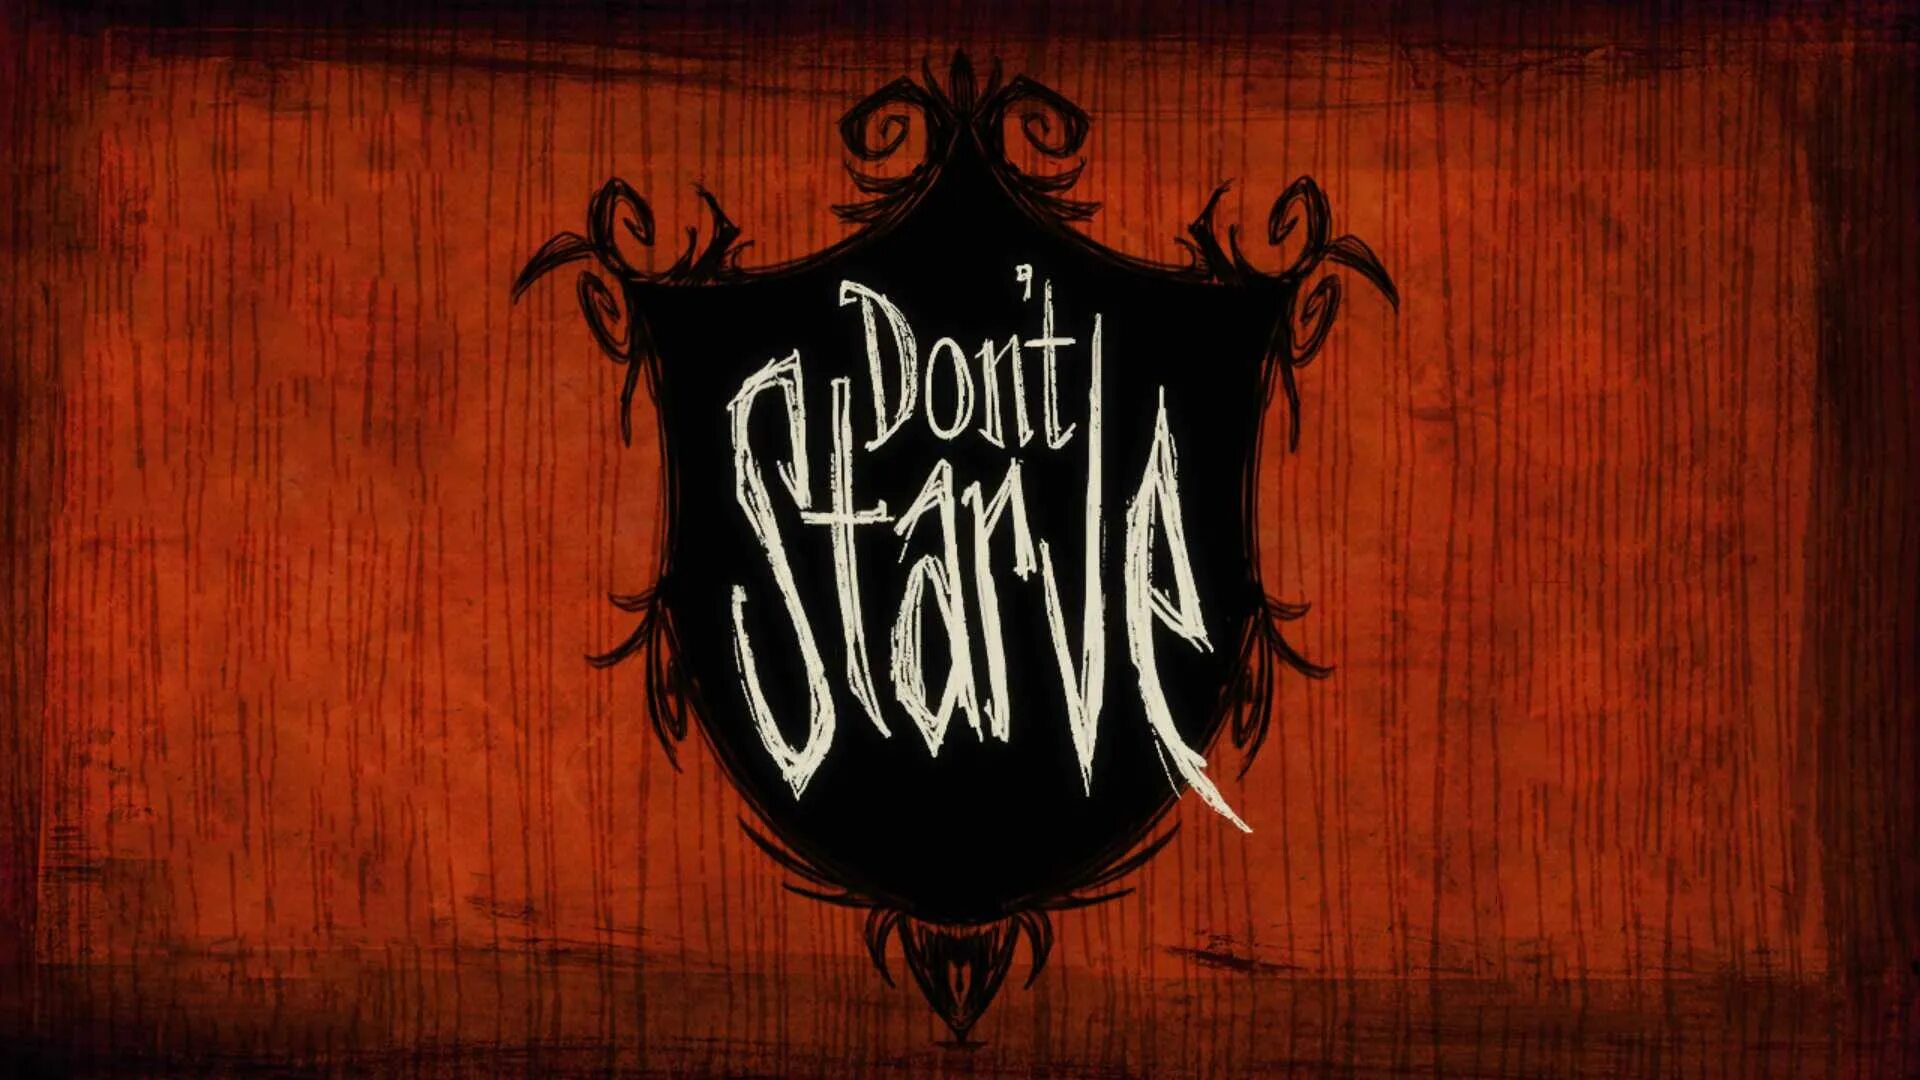 Don't Starve together menu. Don't Starve together меню. Don't Starve логотип. Don't Starve фон. Don t object